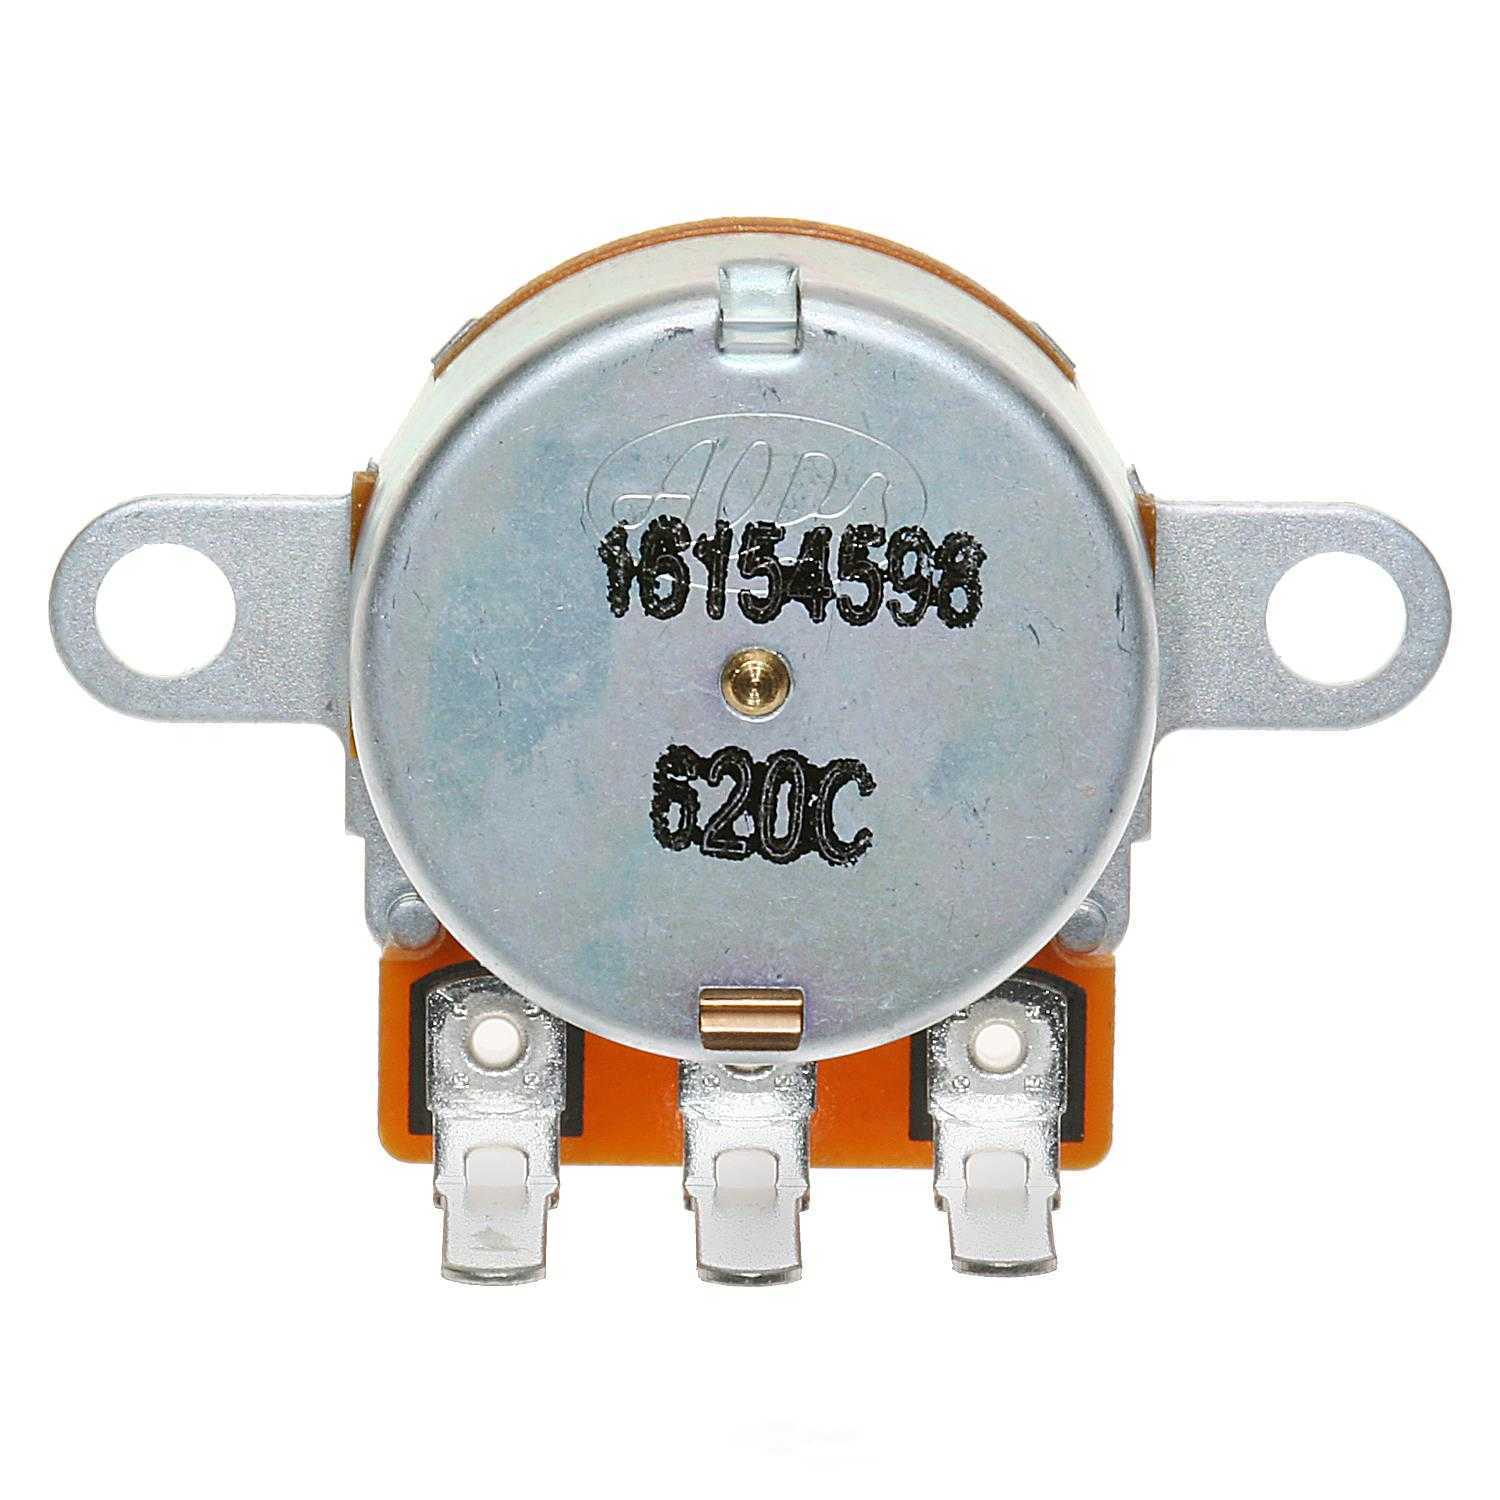 STANDARD MOTOR PRODUCTS - HVAC Control Switch - STA HS-348